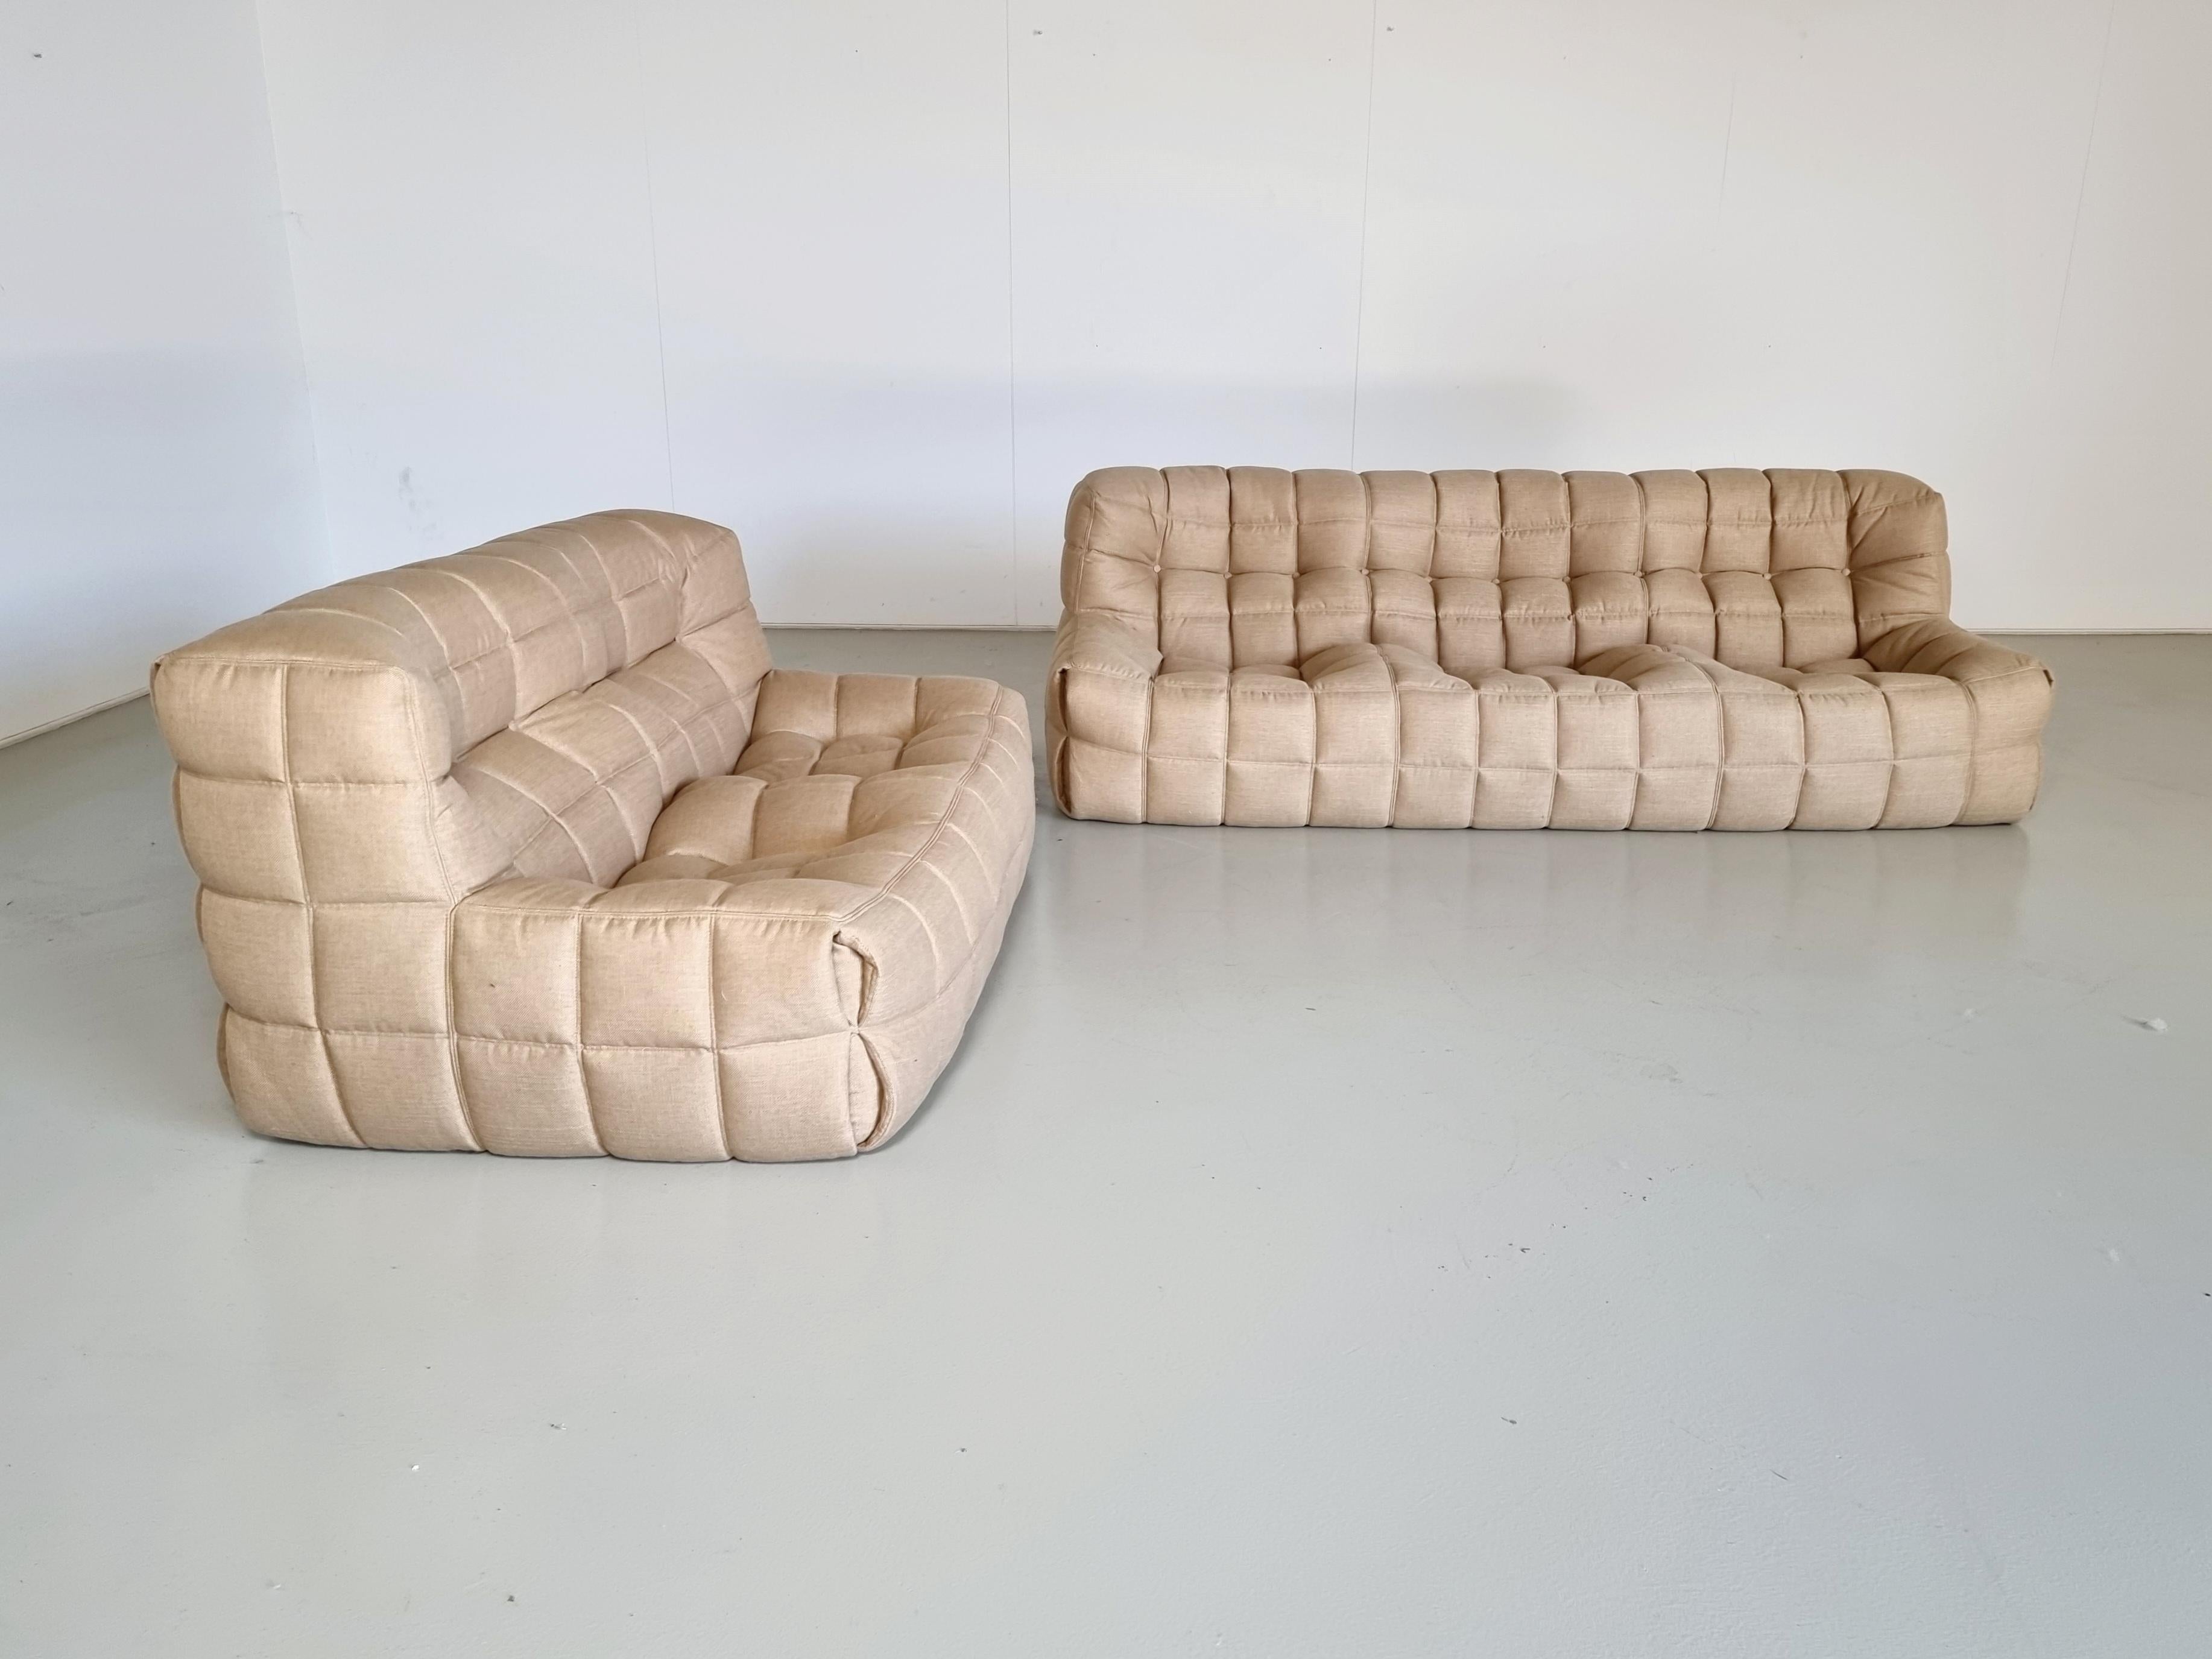 Late 20th Century Kashima 2-Seater Sofa by Michel Ducaroy for Ligne Roset, 1970s For Sale